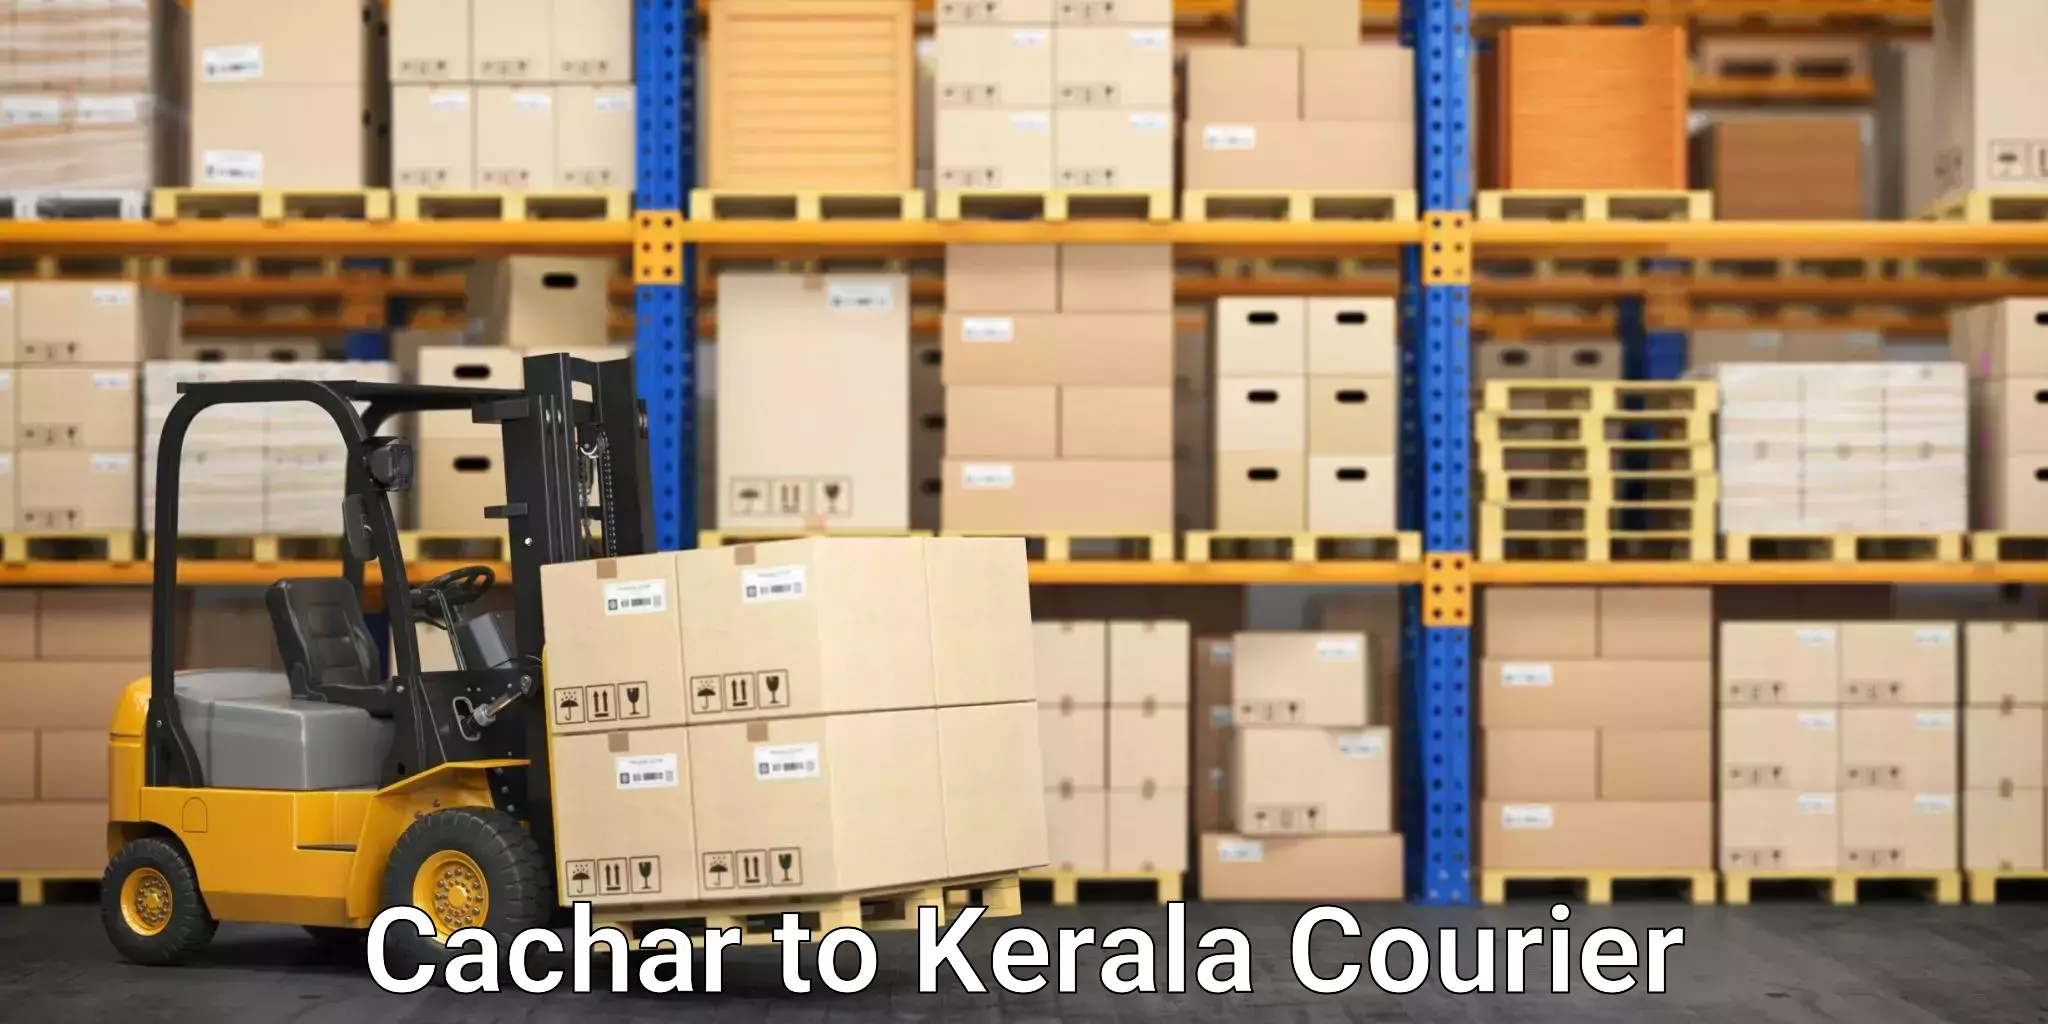 Comprehensive parcel tracking Cachar to Kochi